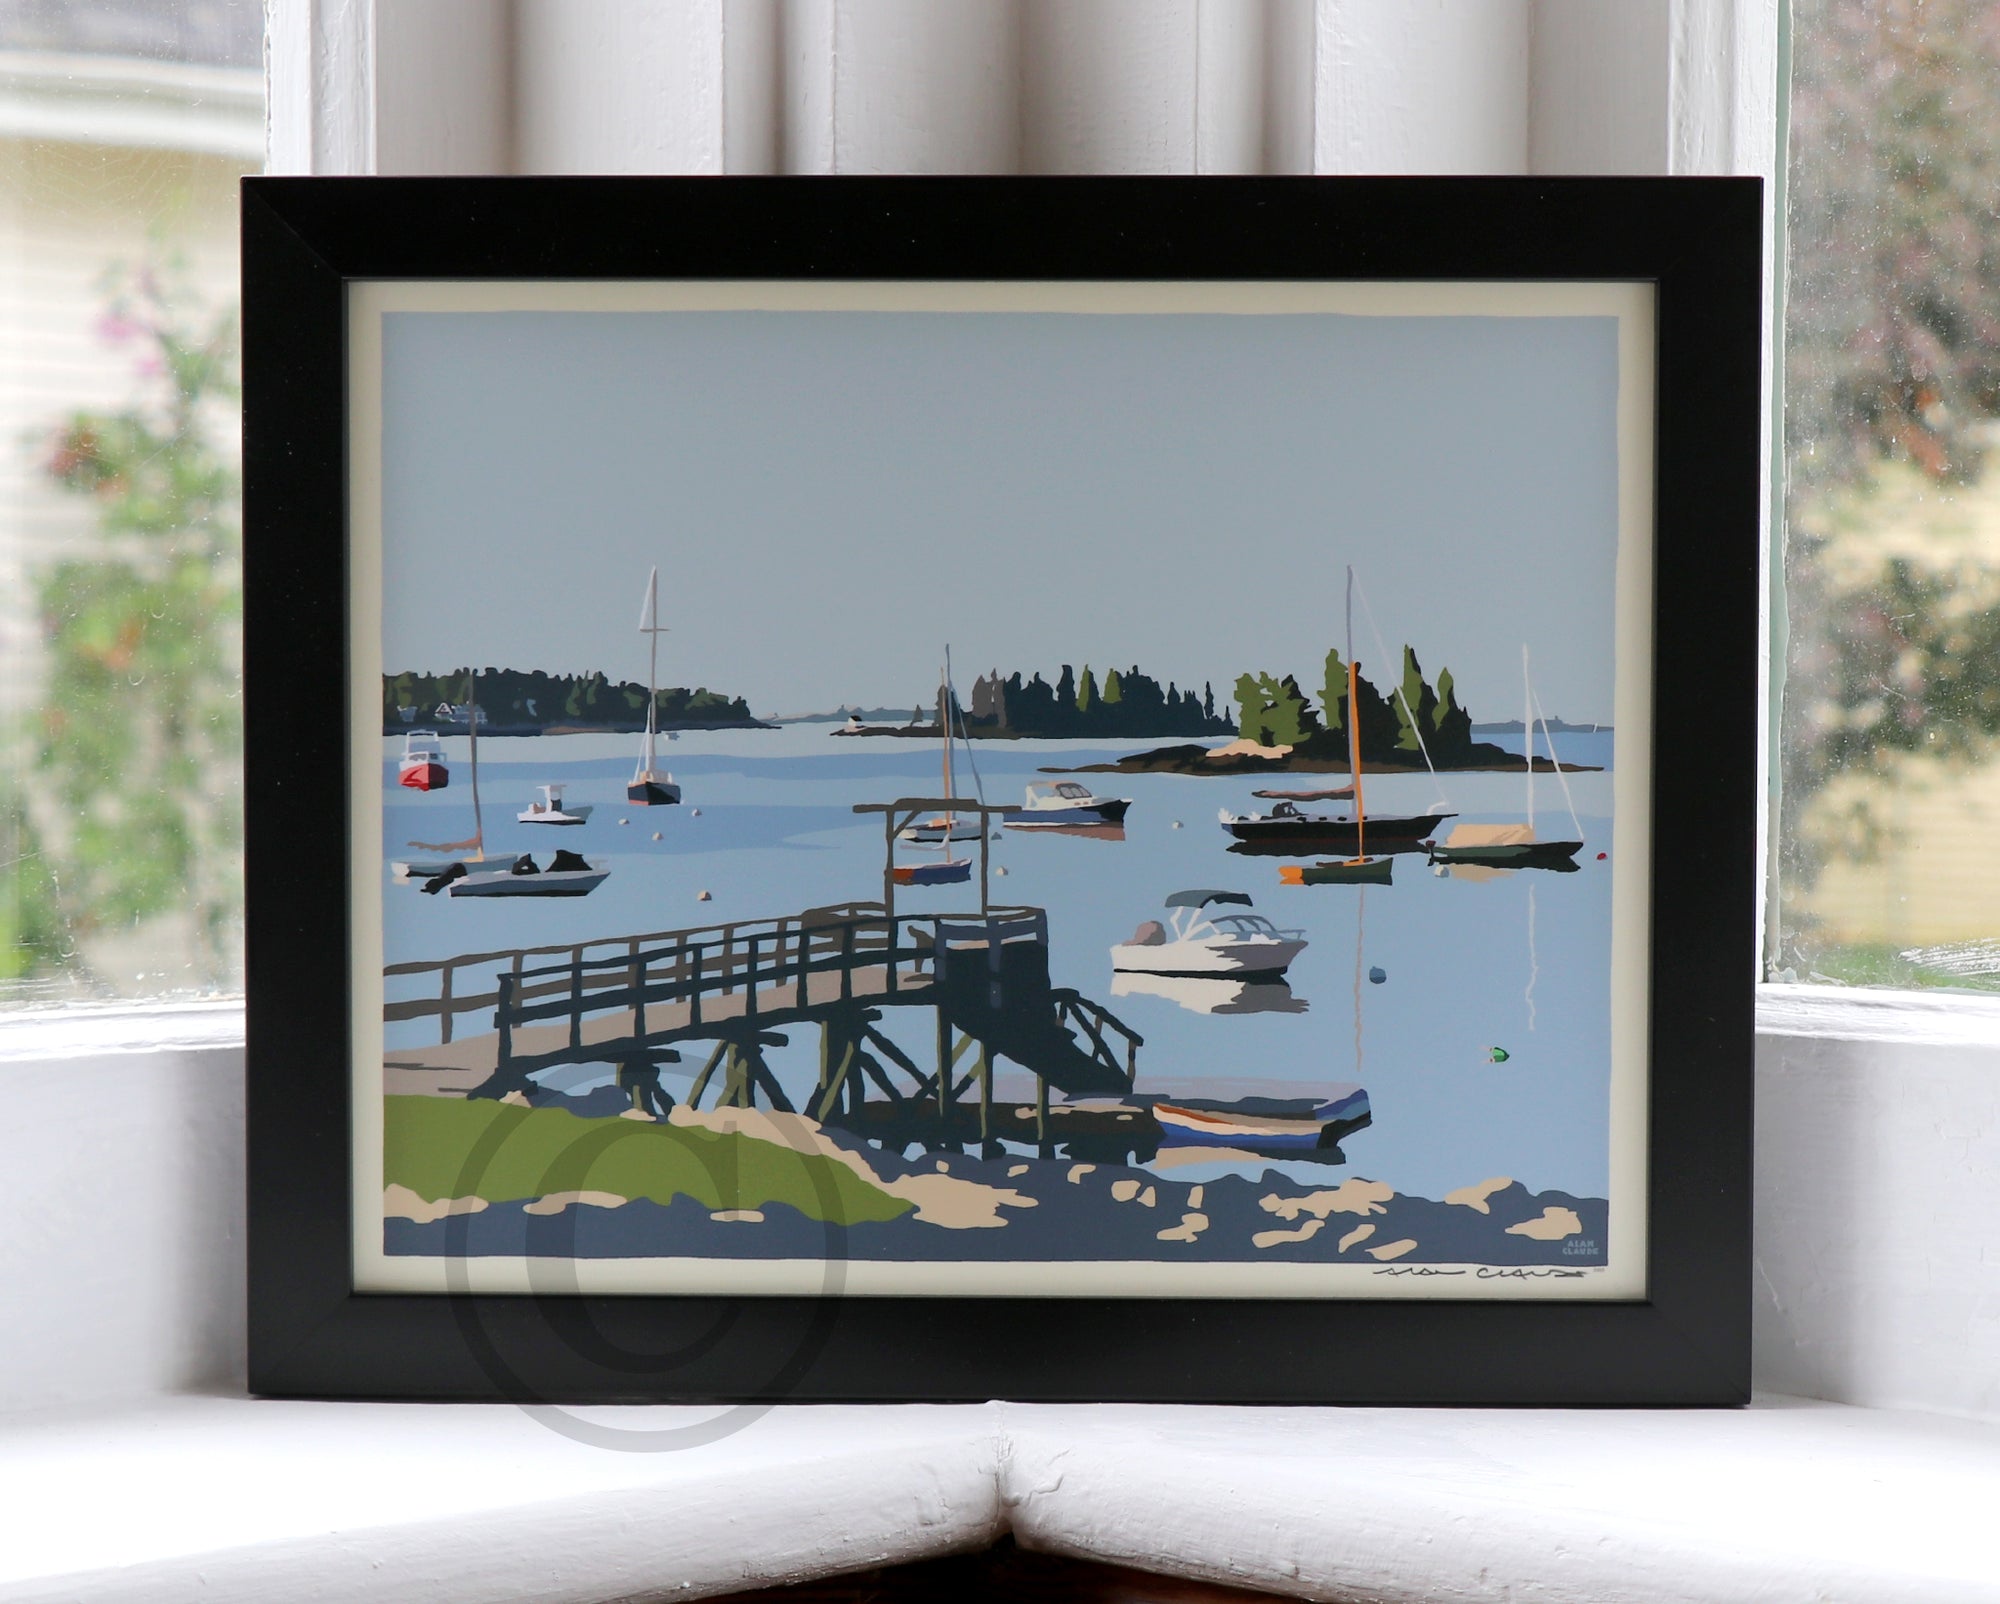 Sailboats in Boothbay Harbor Art Print 8" x 10" Horizontal Framed Wall Poster By Alan Claude - Maine